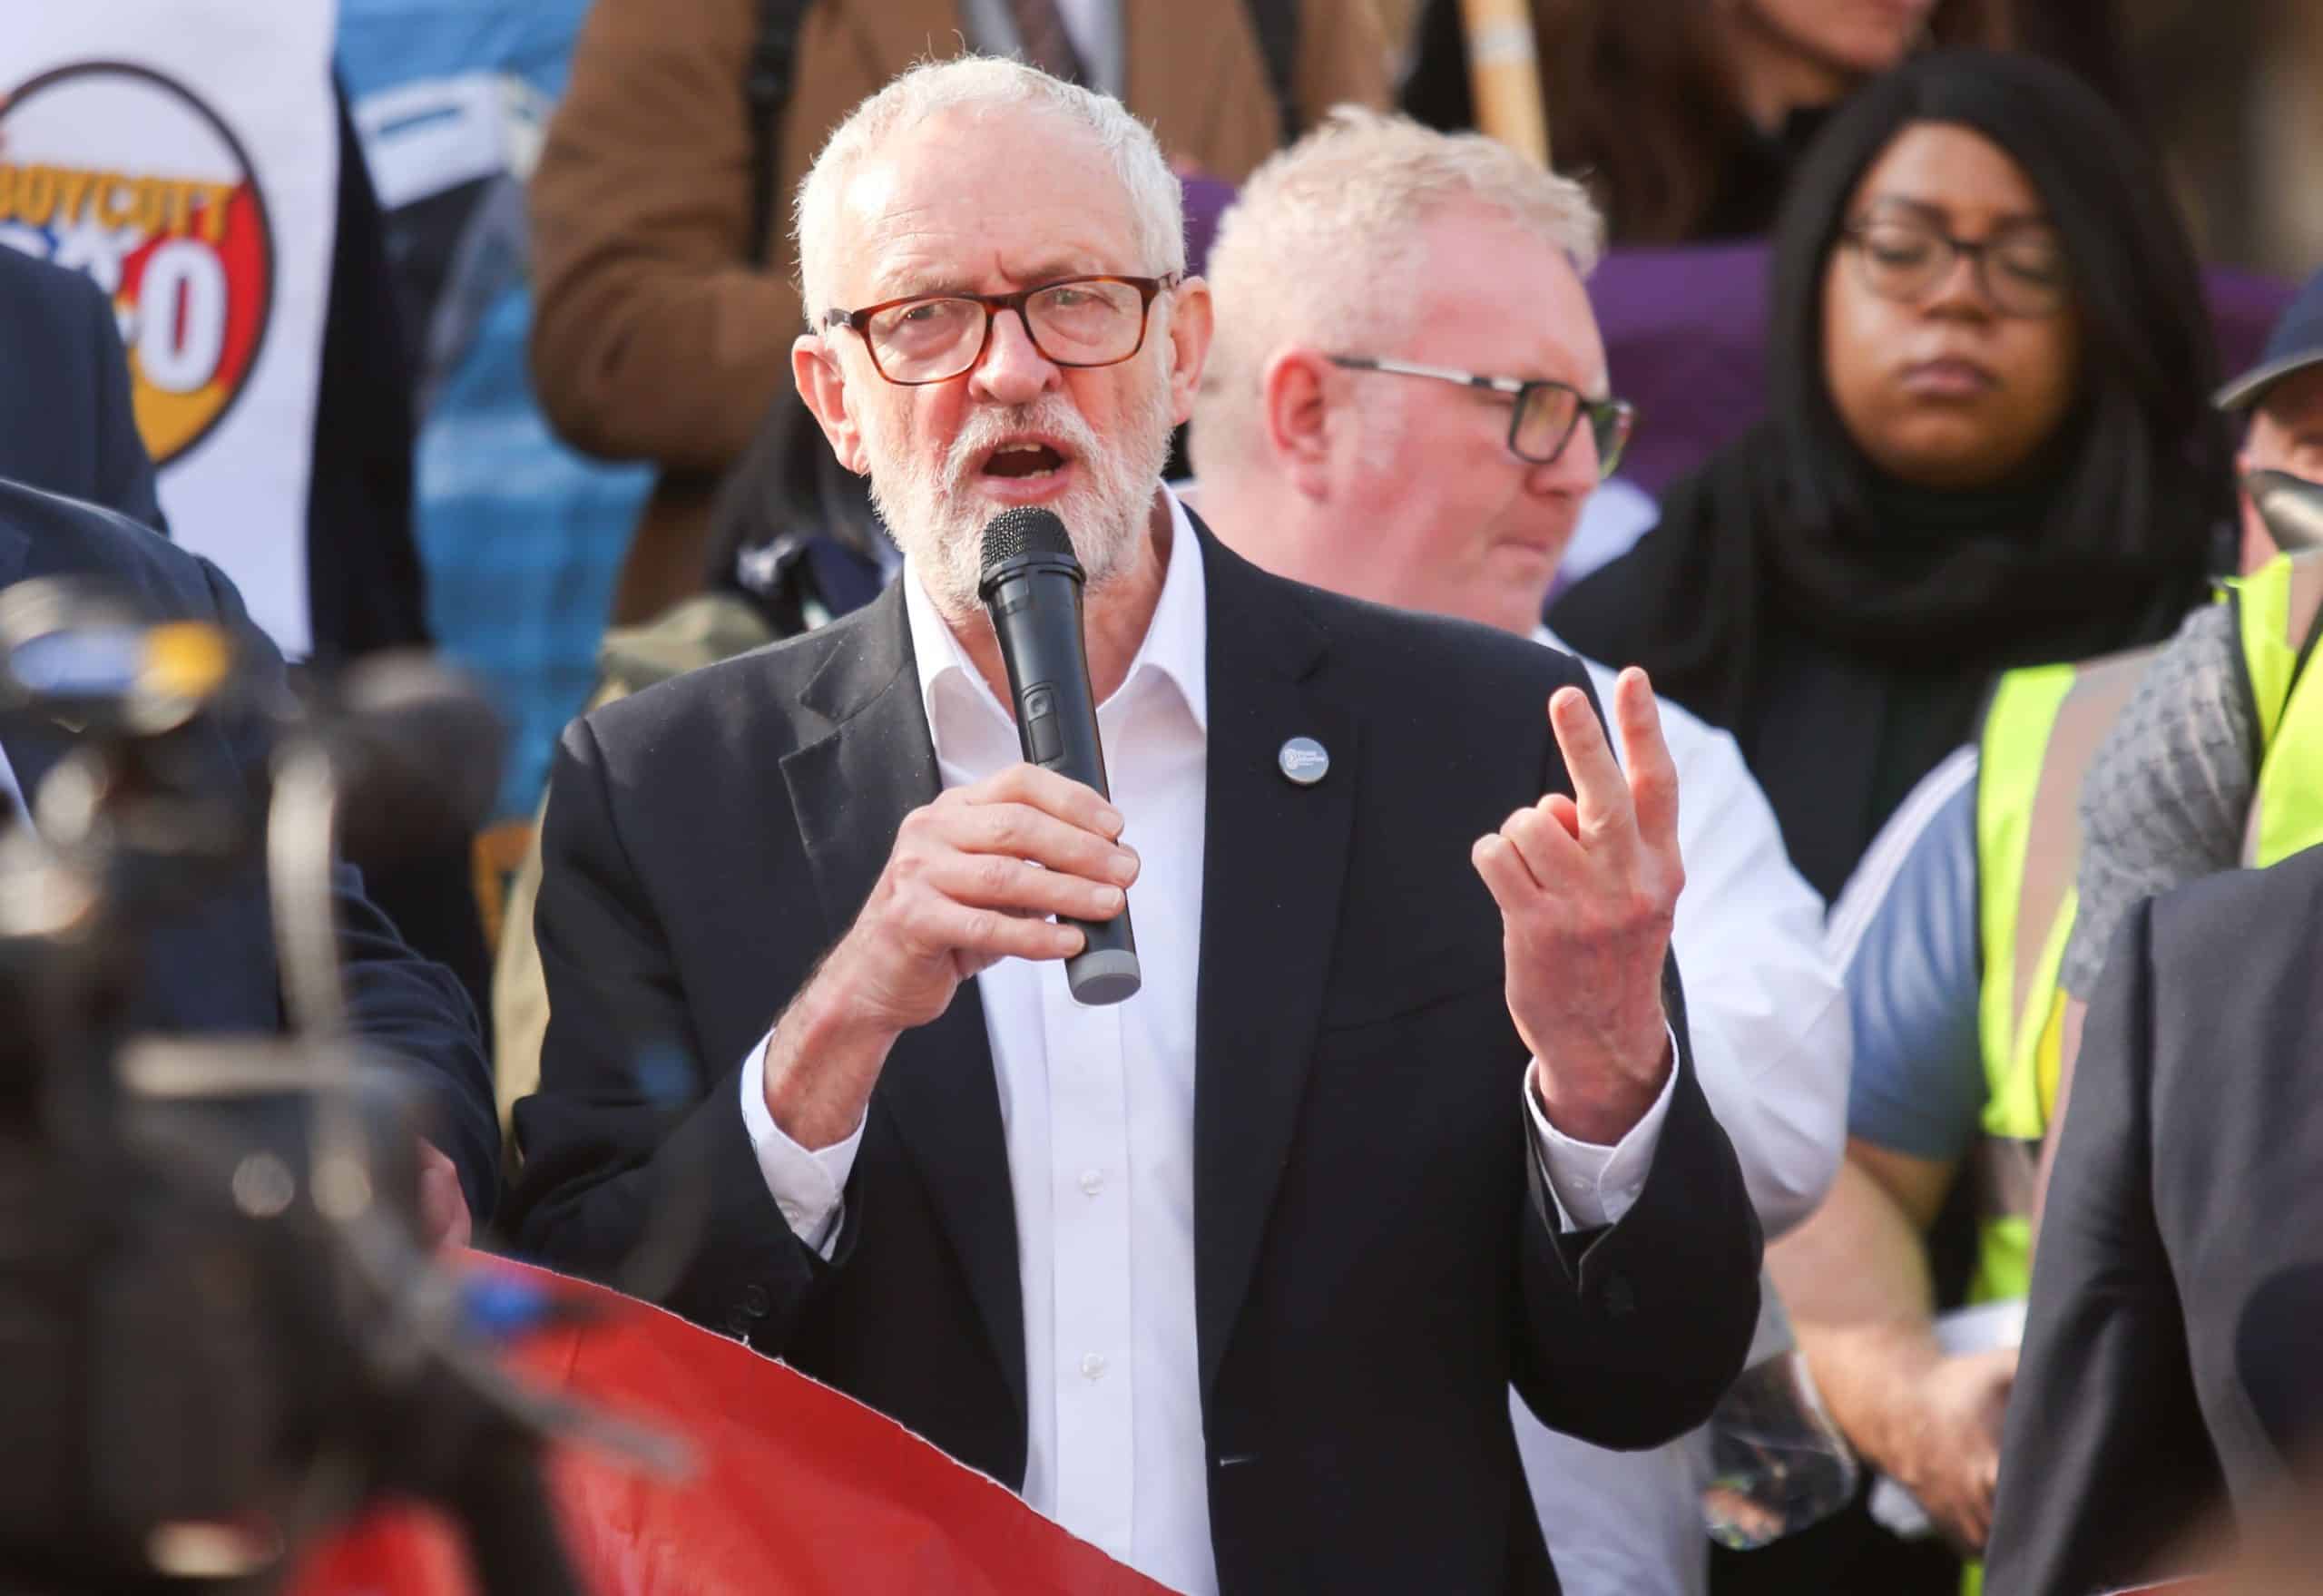 Watch: Corbyn addresses cost-of-living rally with impassioned speech